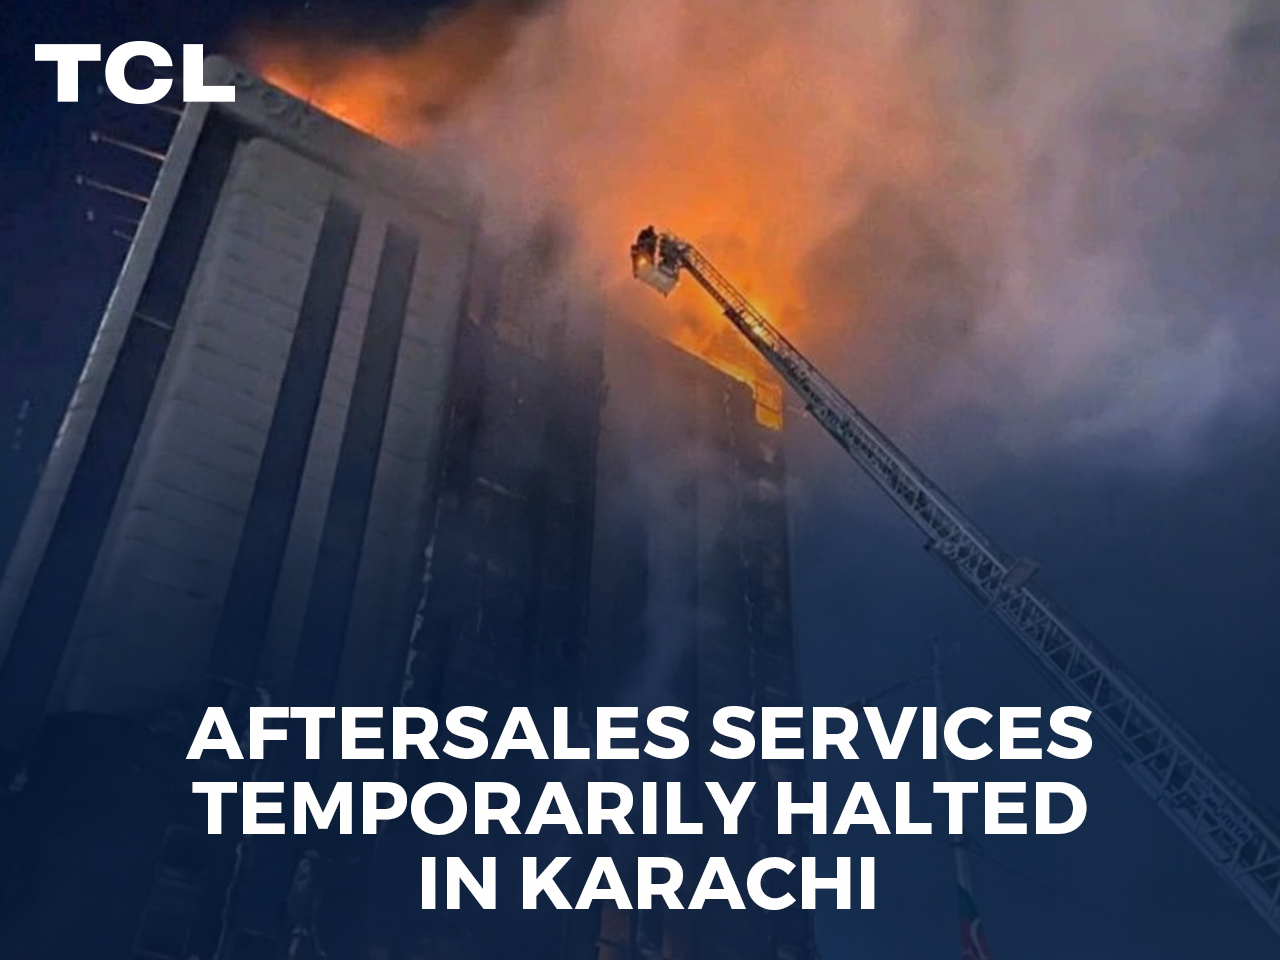 Tragic Fire Destroys TCL Aftersales Office in Karachi